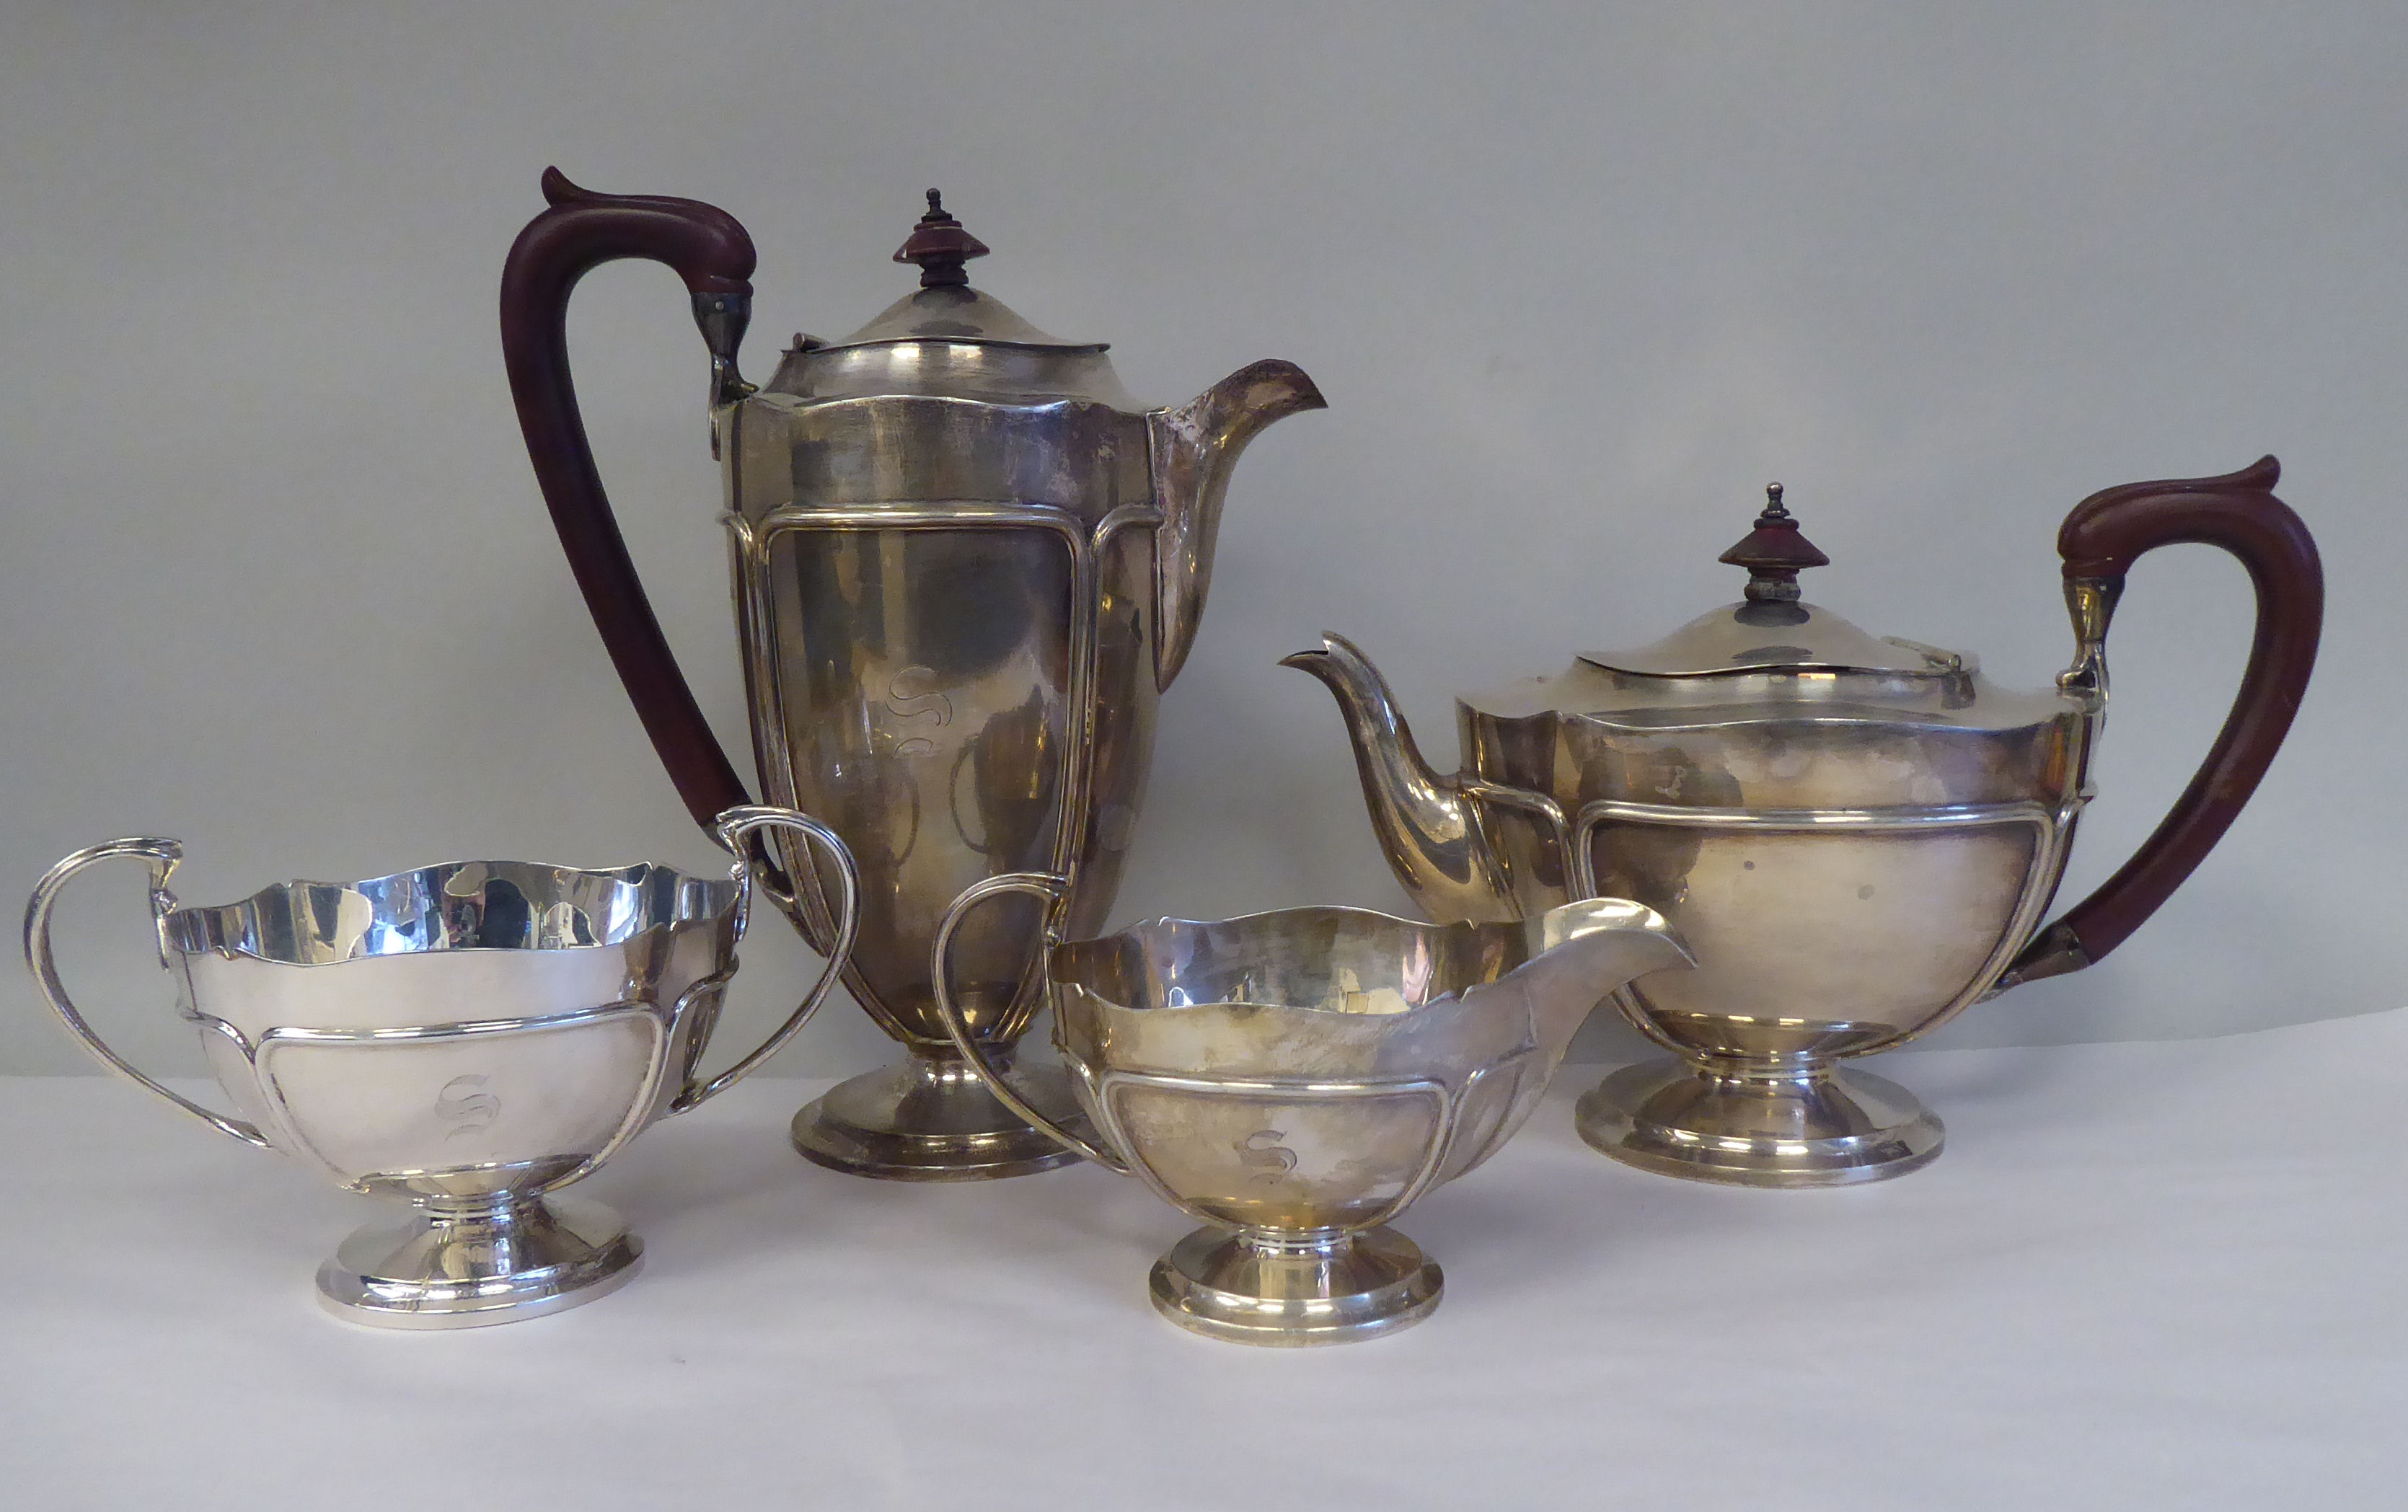 A four piece silver tea set, comprising a teapot of pedestal bowl display with an S-swept swept,